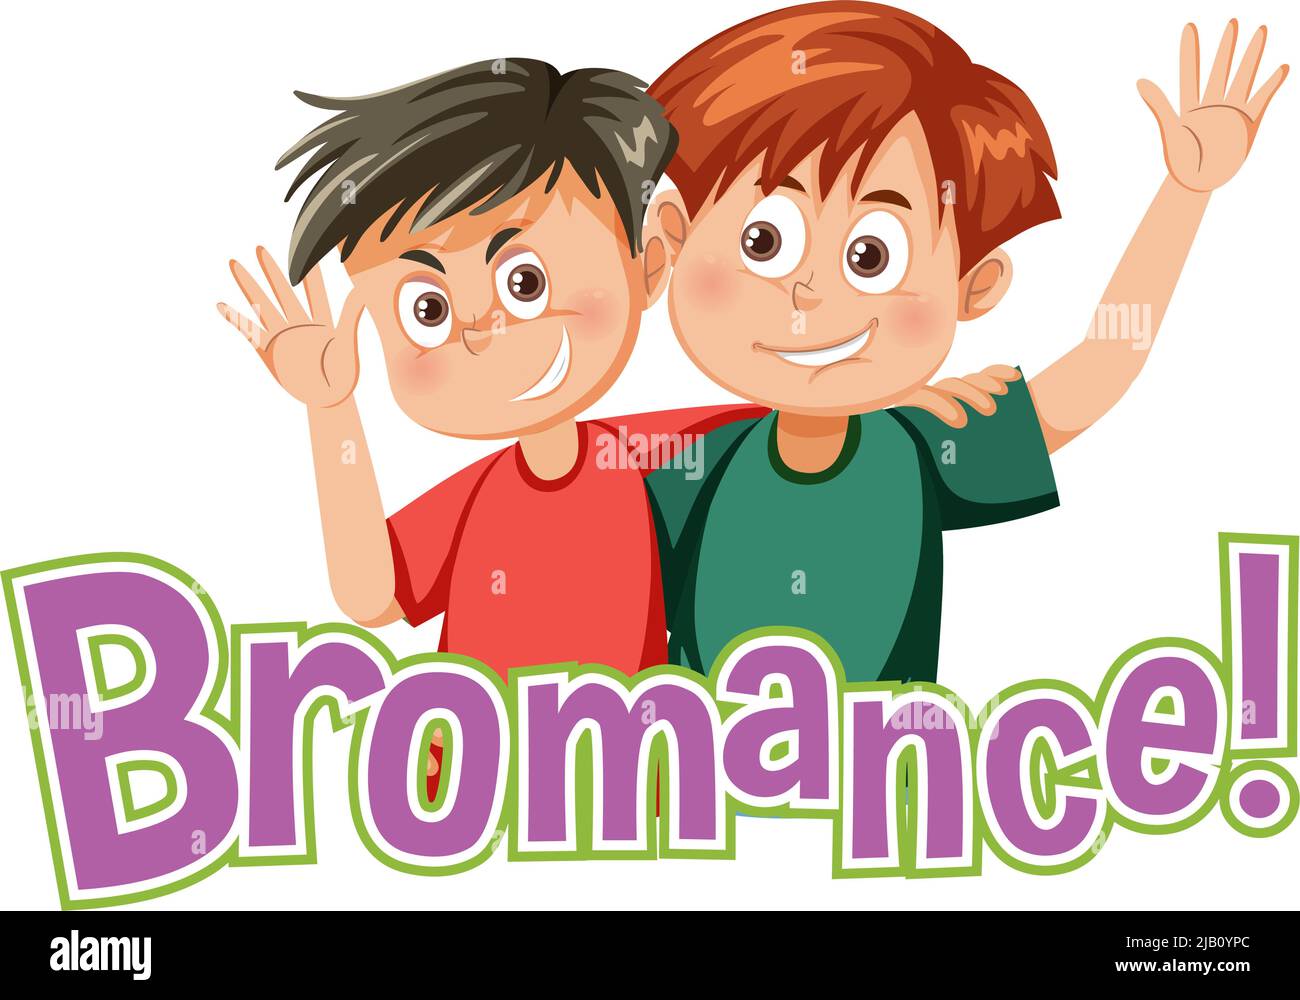 Is bromance a real word?